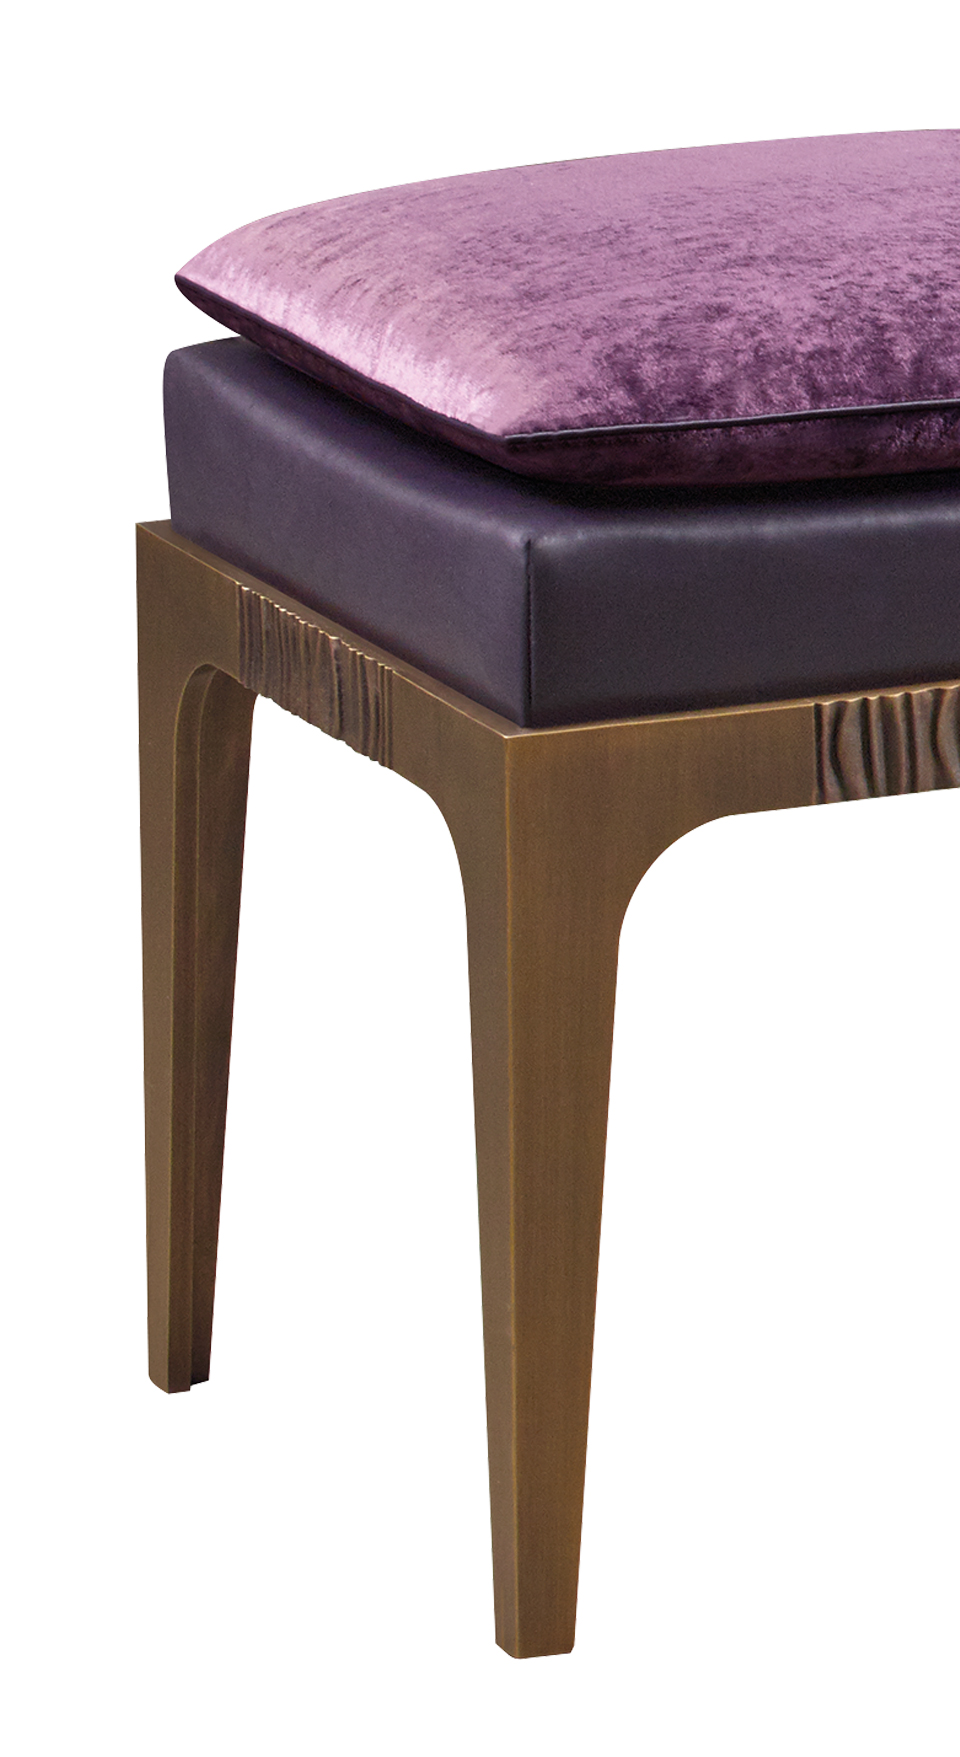 Detail of Montagu, a bronze stool with leather seat and fabric cushion, from Promemoria's The London Collection | Promemoria